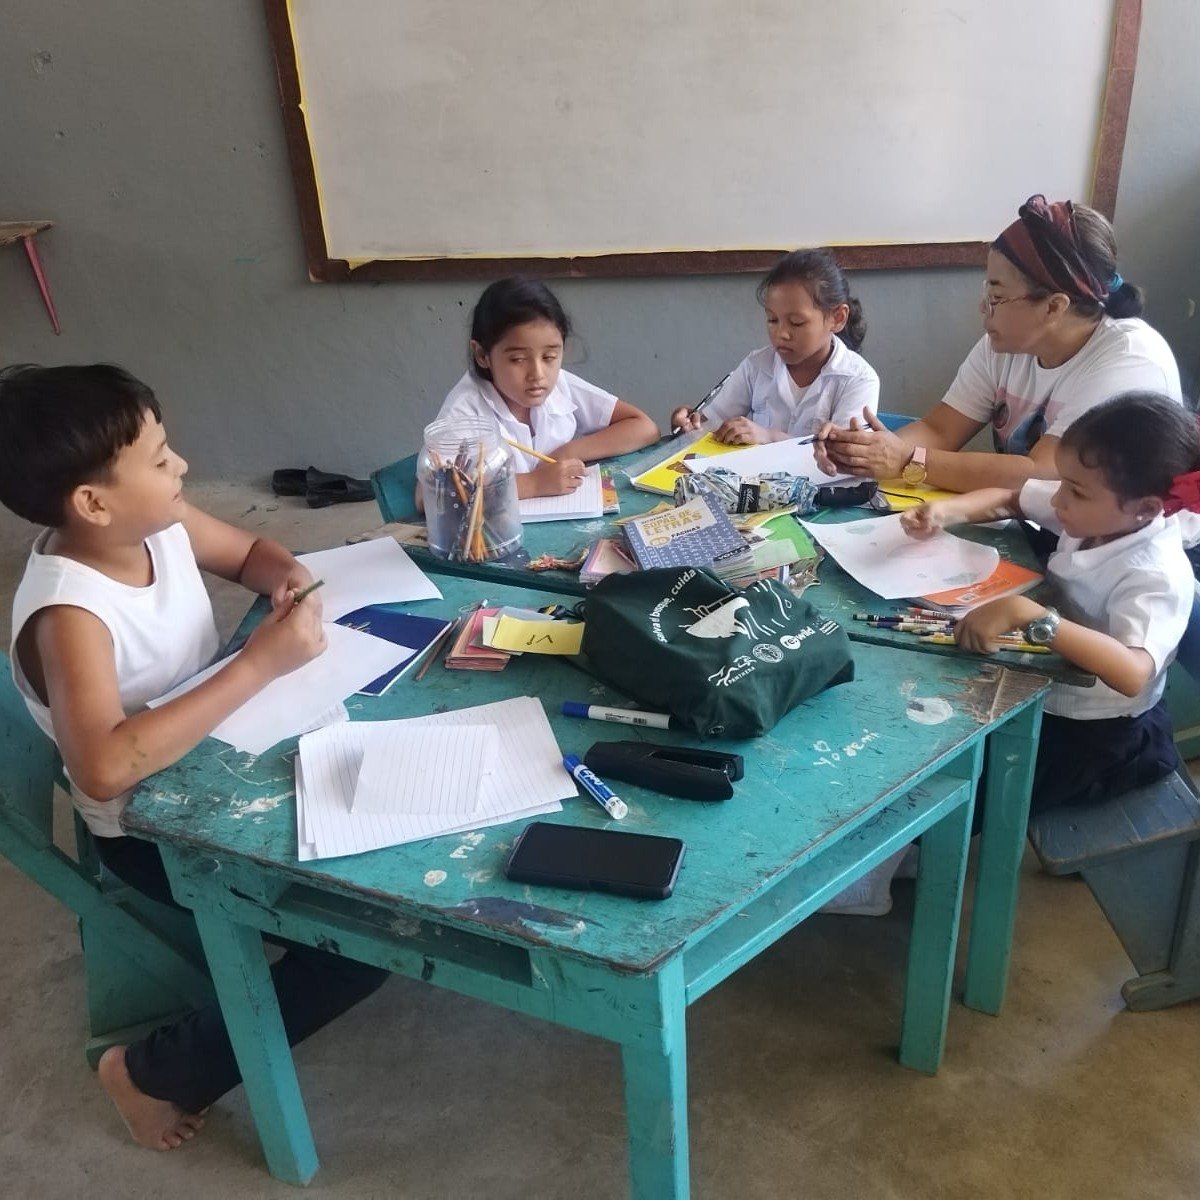 Happy Earth Day! 🌎 Check out these awesome #LitKids in Honduras, who showed our planet some love by writing stories about the environment and brainstorming small ways they can protect and protect it. Together, we can make a big difference in caring 